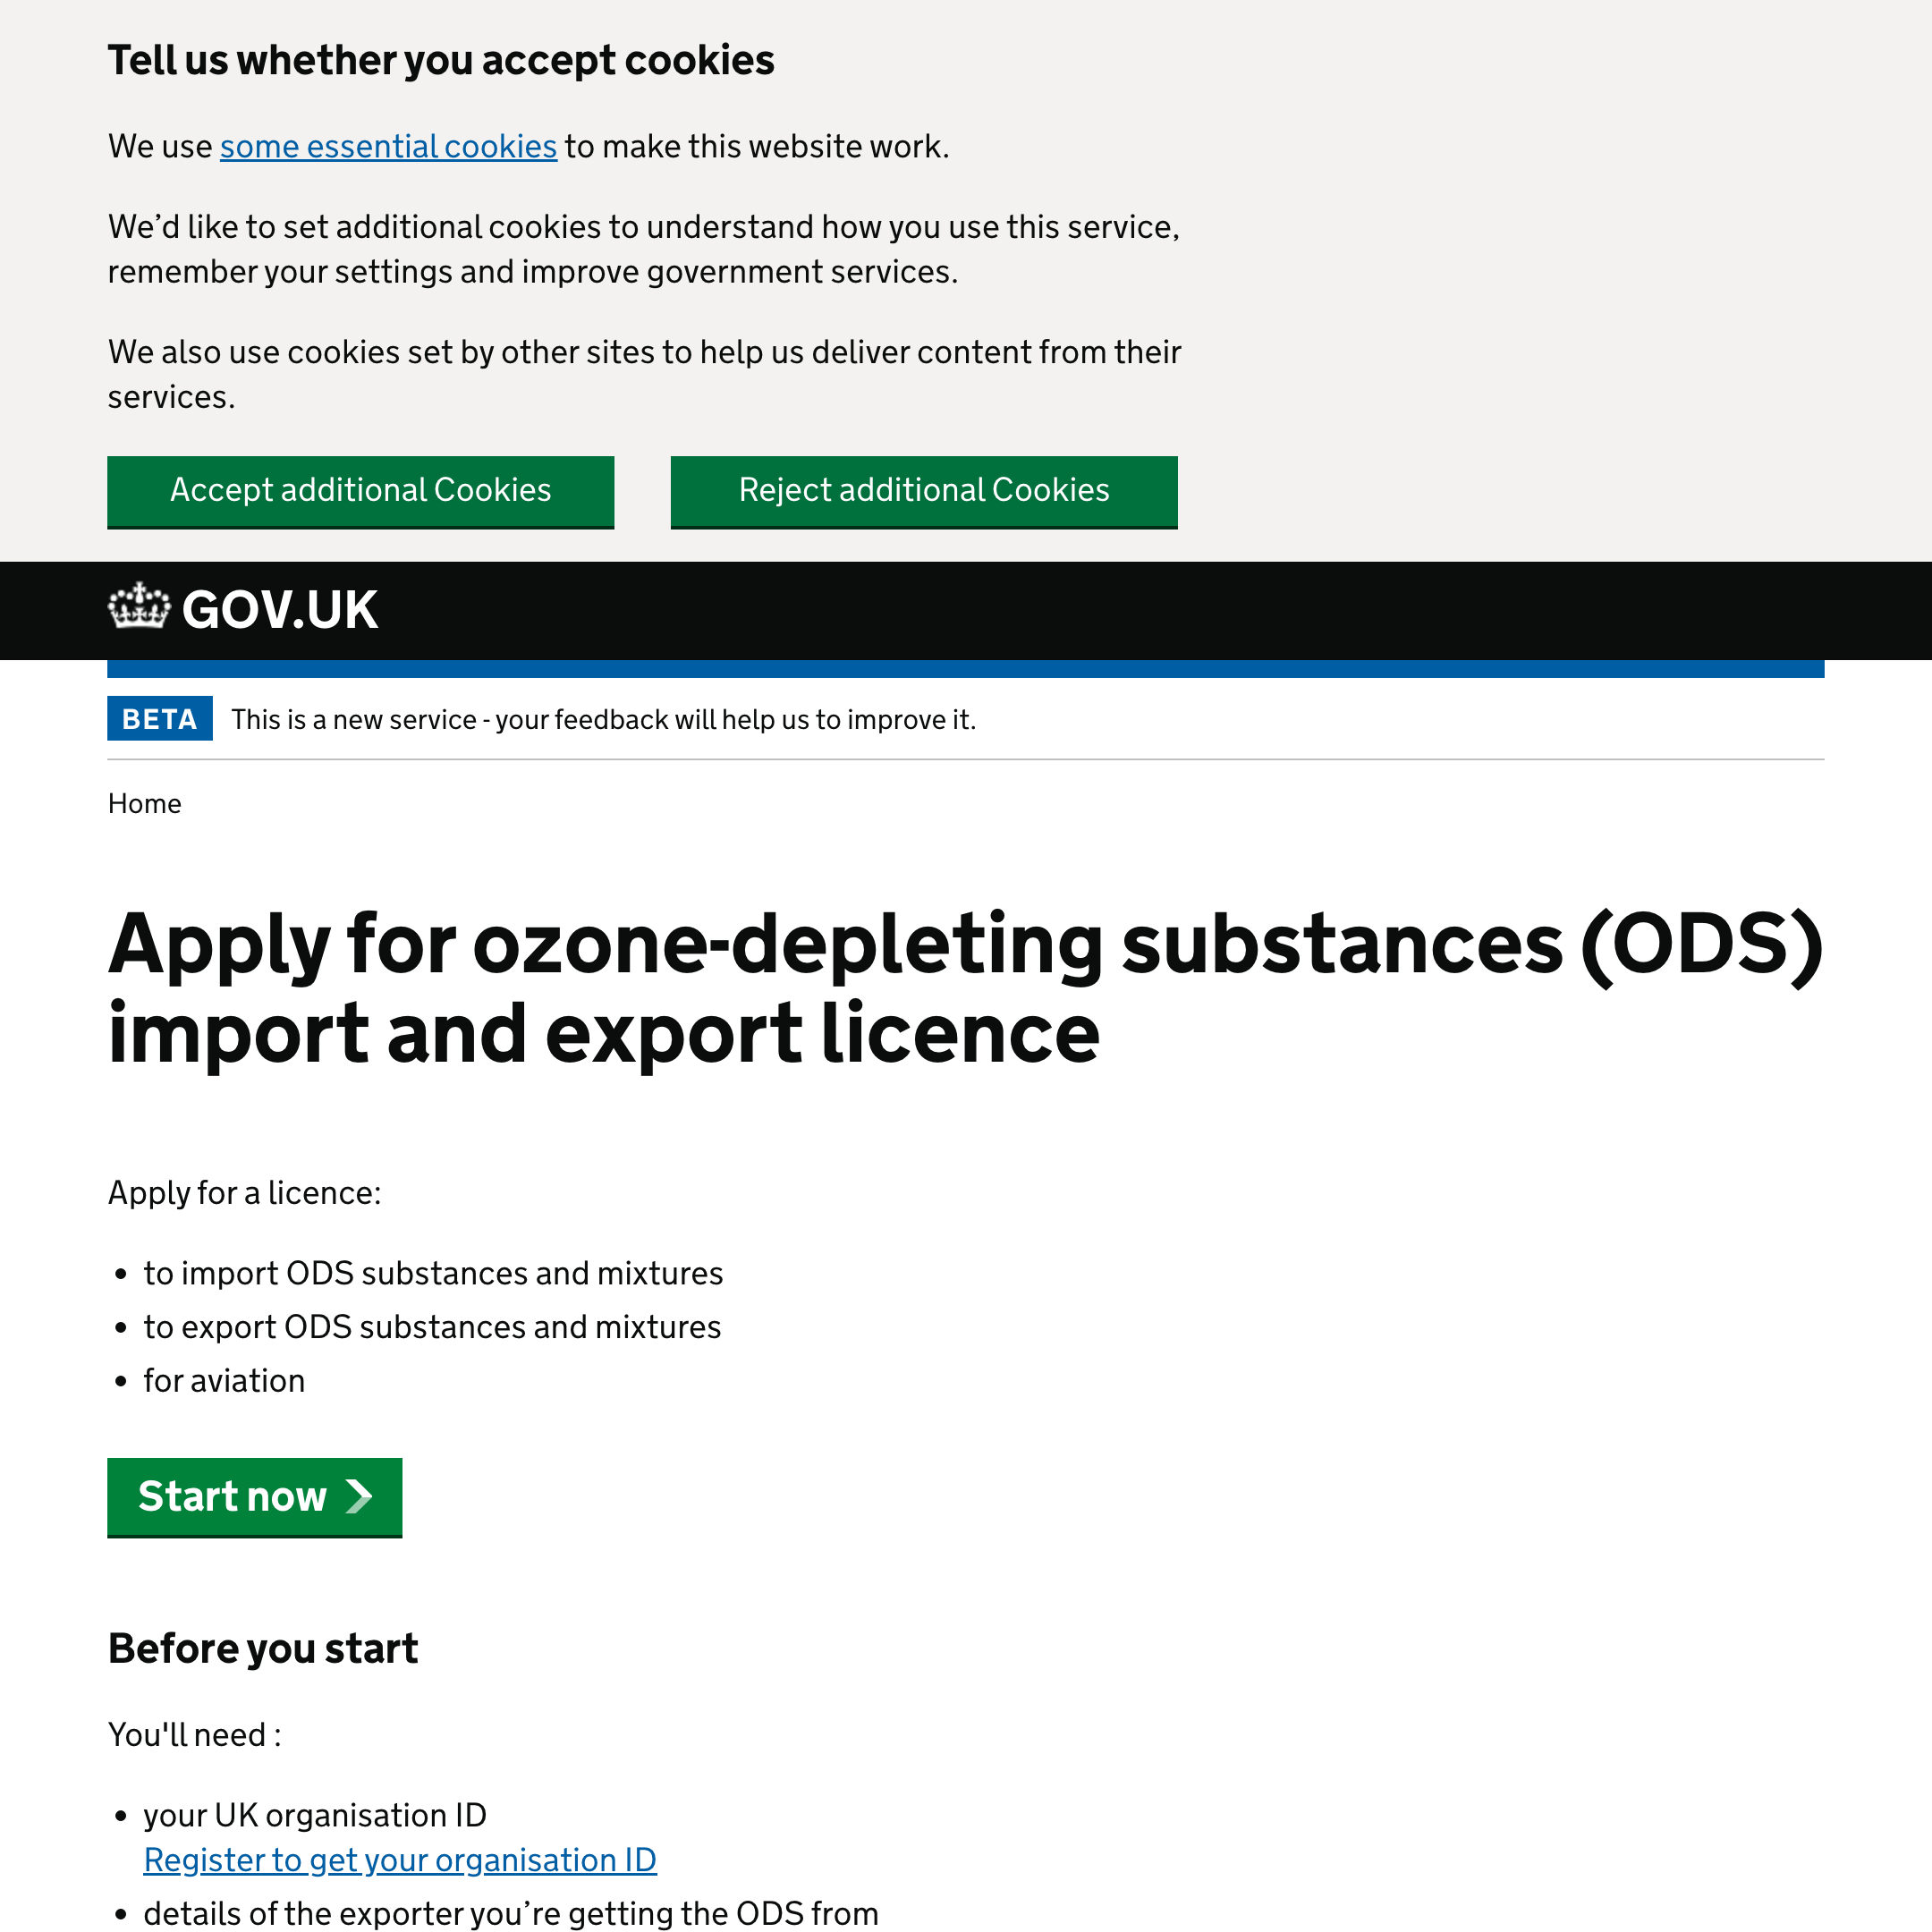 Apply for ozone-depleting substances (ODS) import and export licence